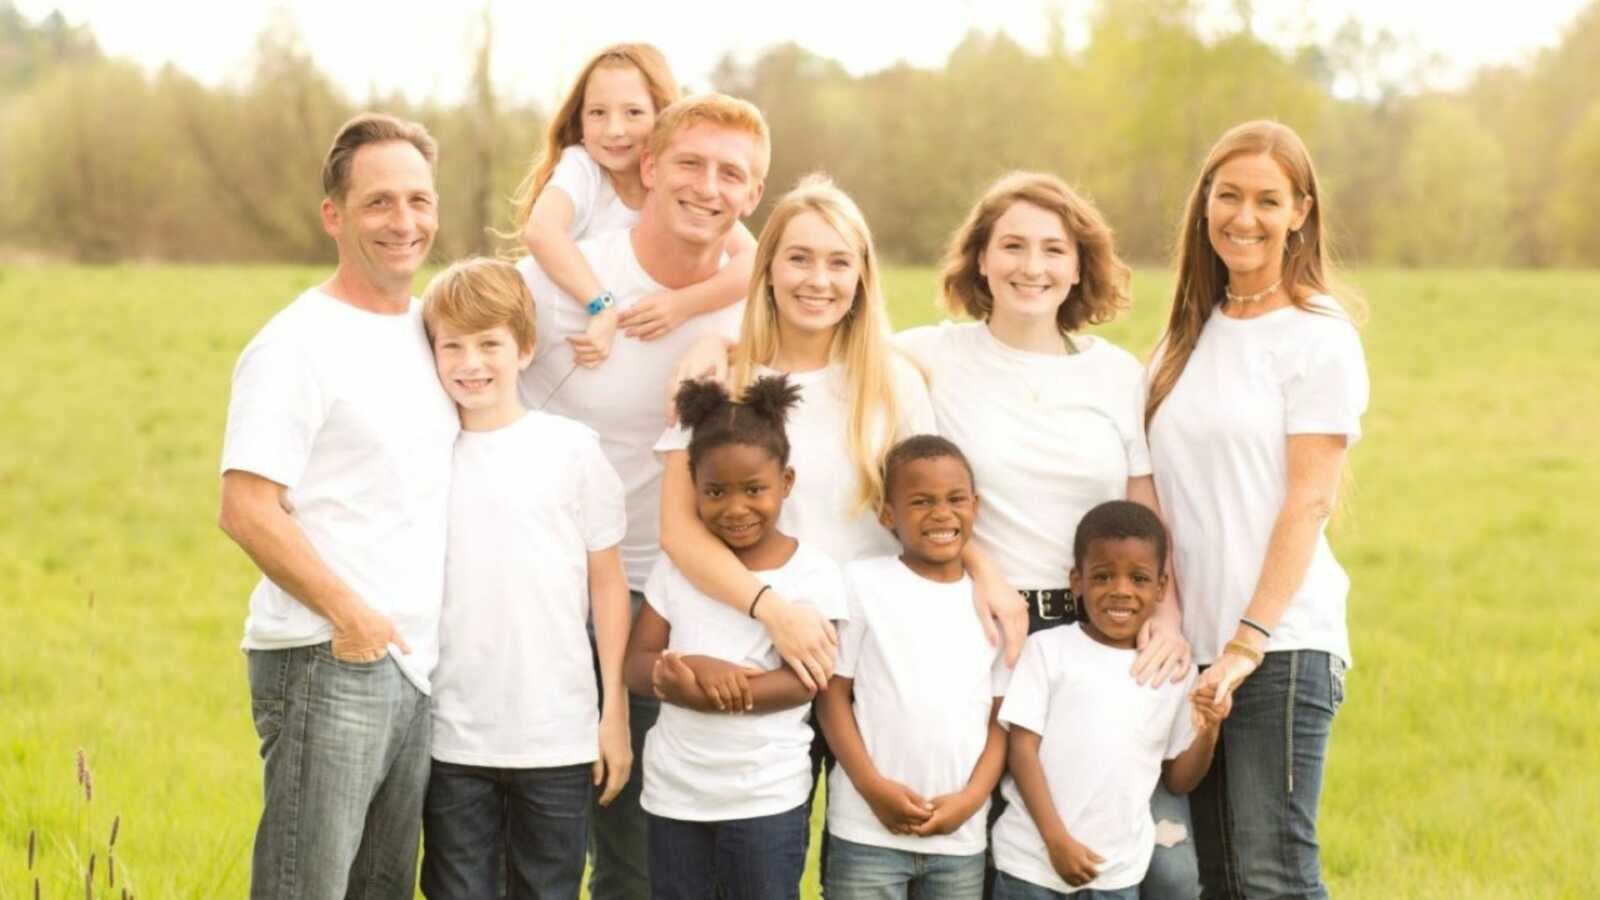 Family of 10 smile big for a group photo in matching outfits